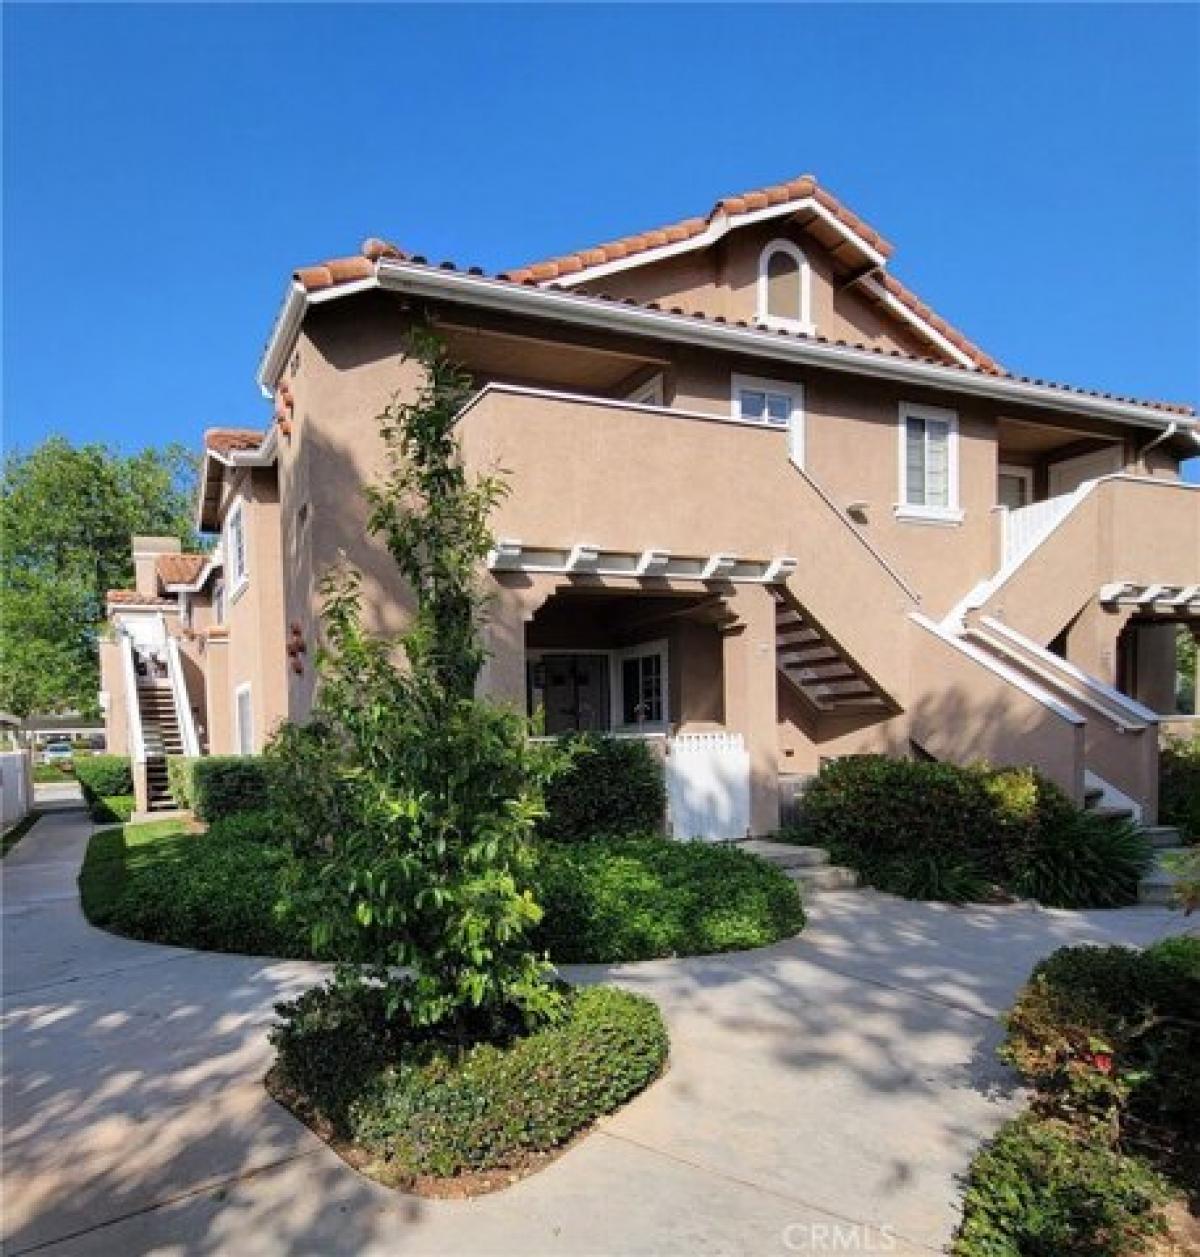 Picture of Home For Rent in Rancho Santa Margarita, California, United States